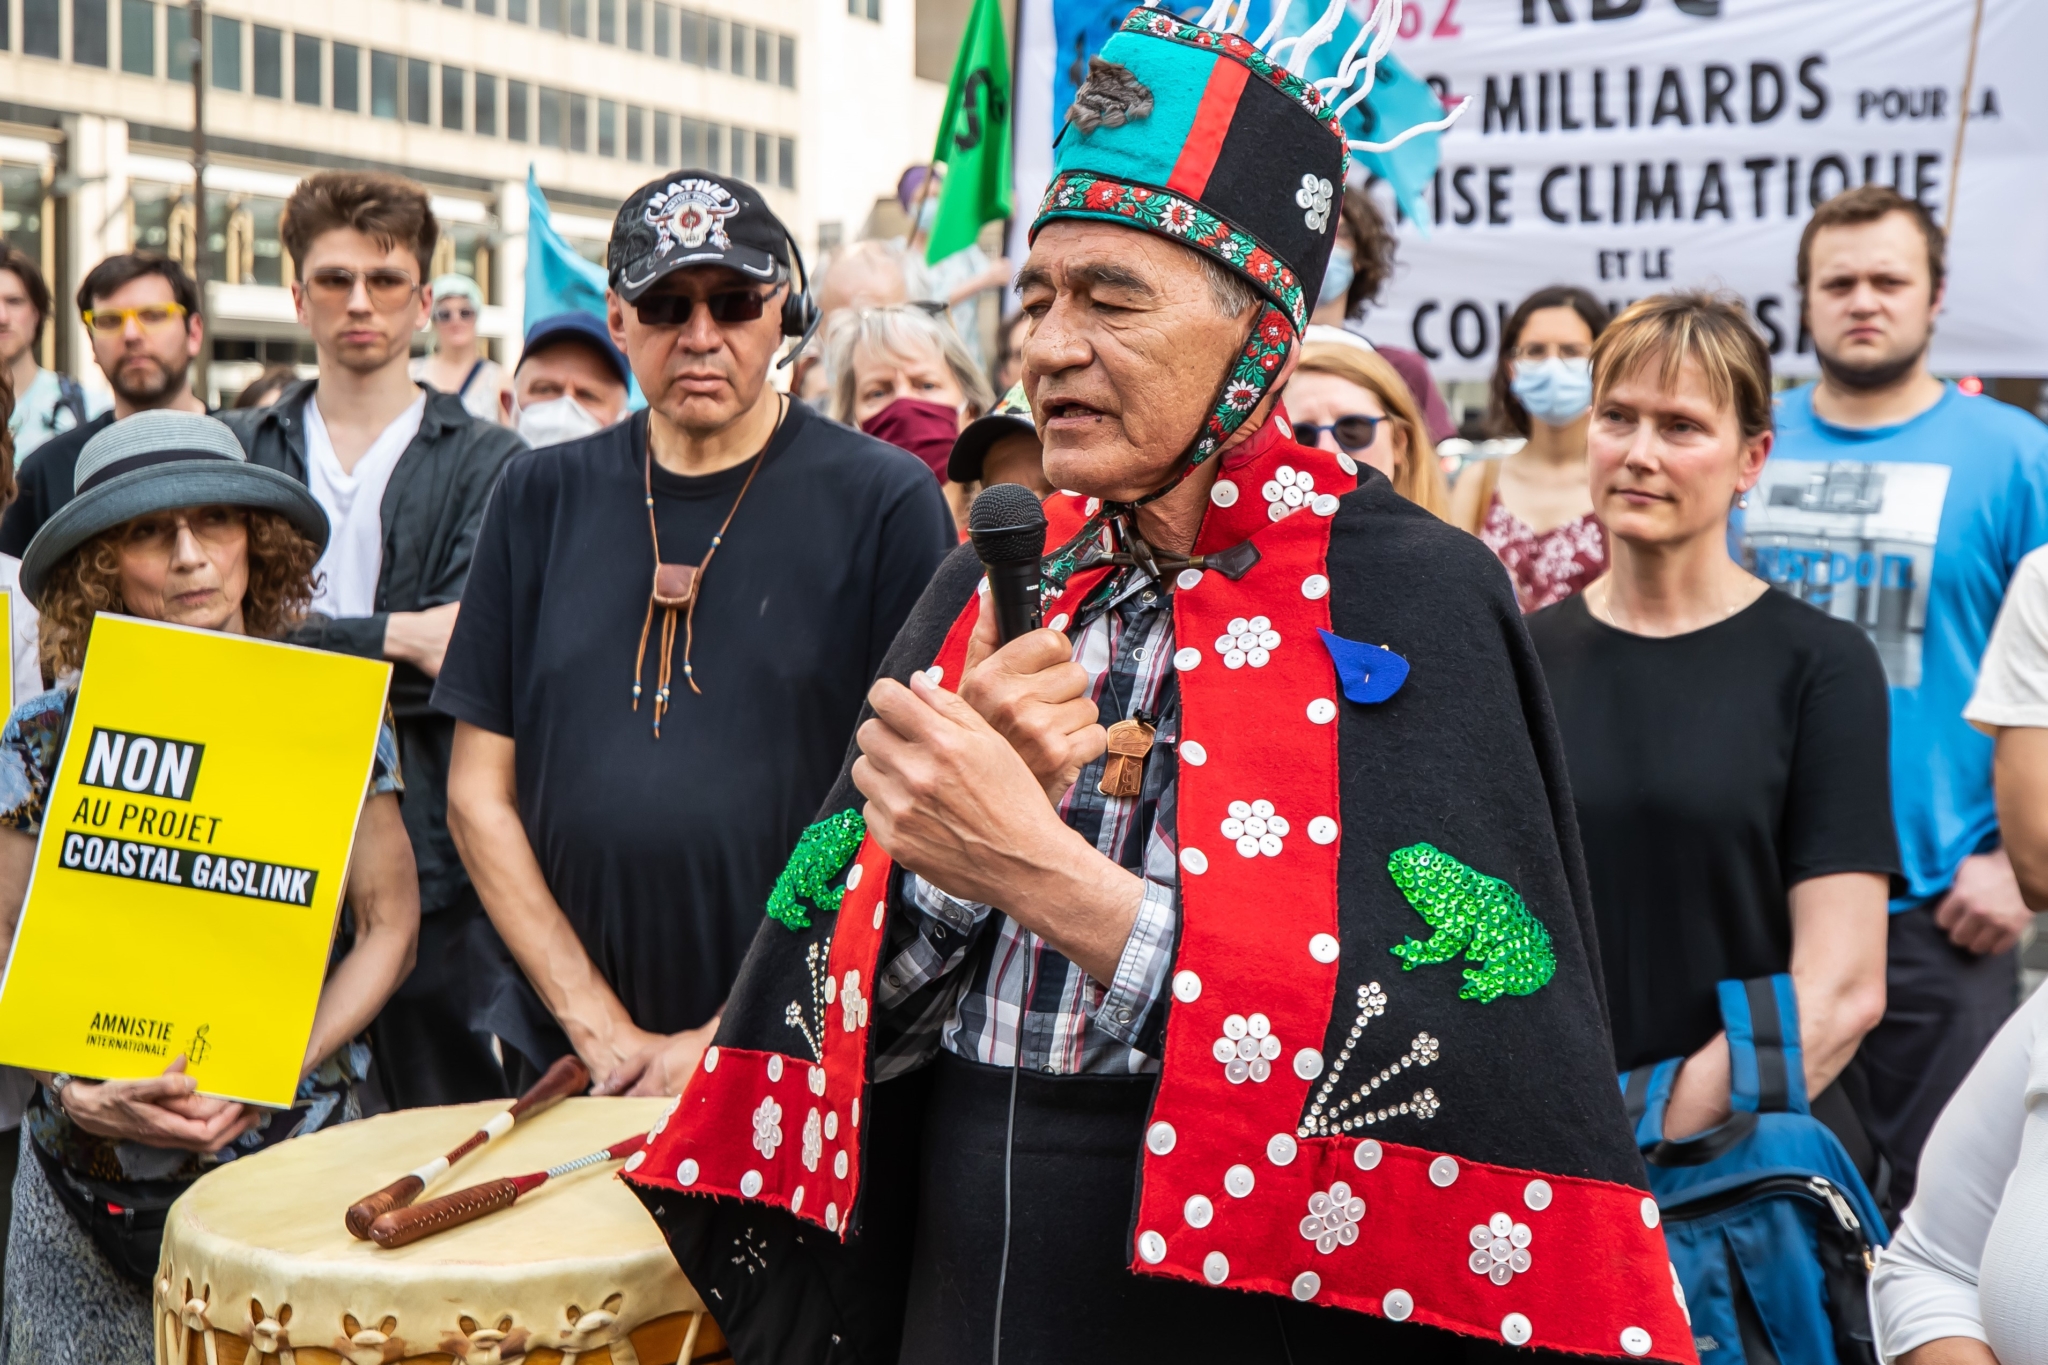 Wet'suwet'en Hereditary Chief Na'Moks speaks at a street protest in Montreal against the Coastal GasLink pipeline